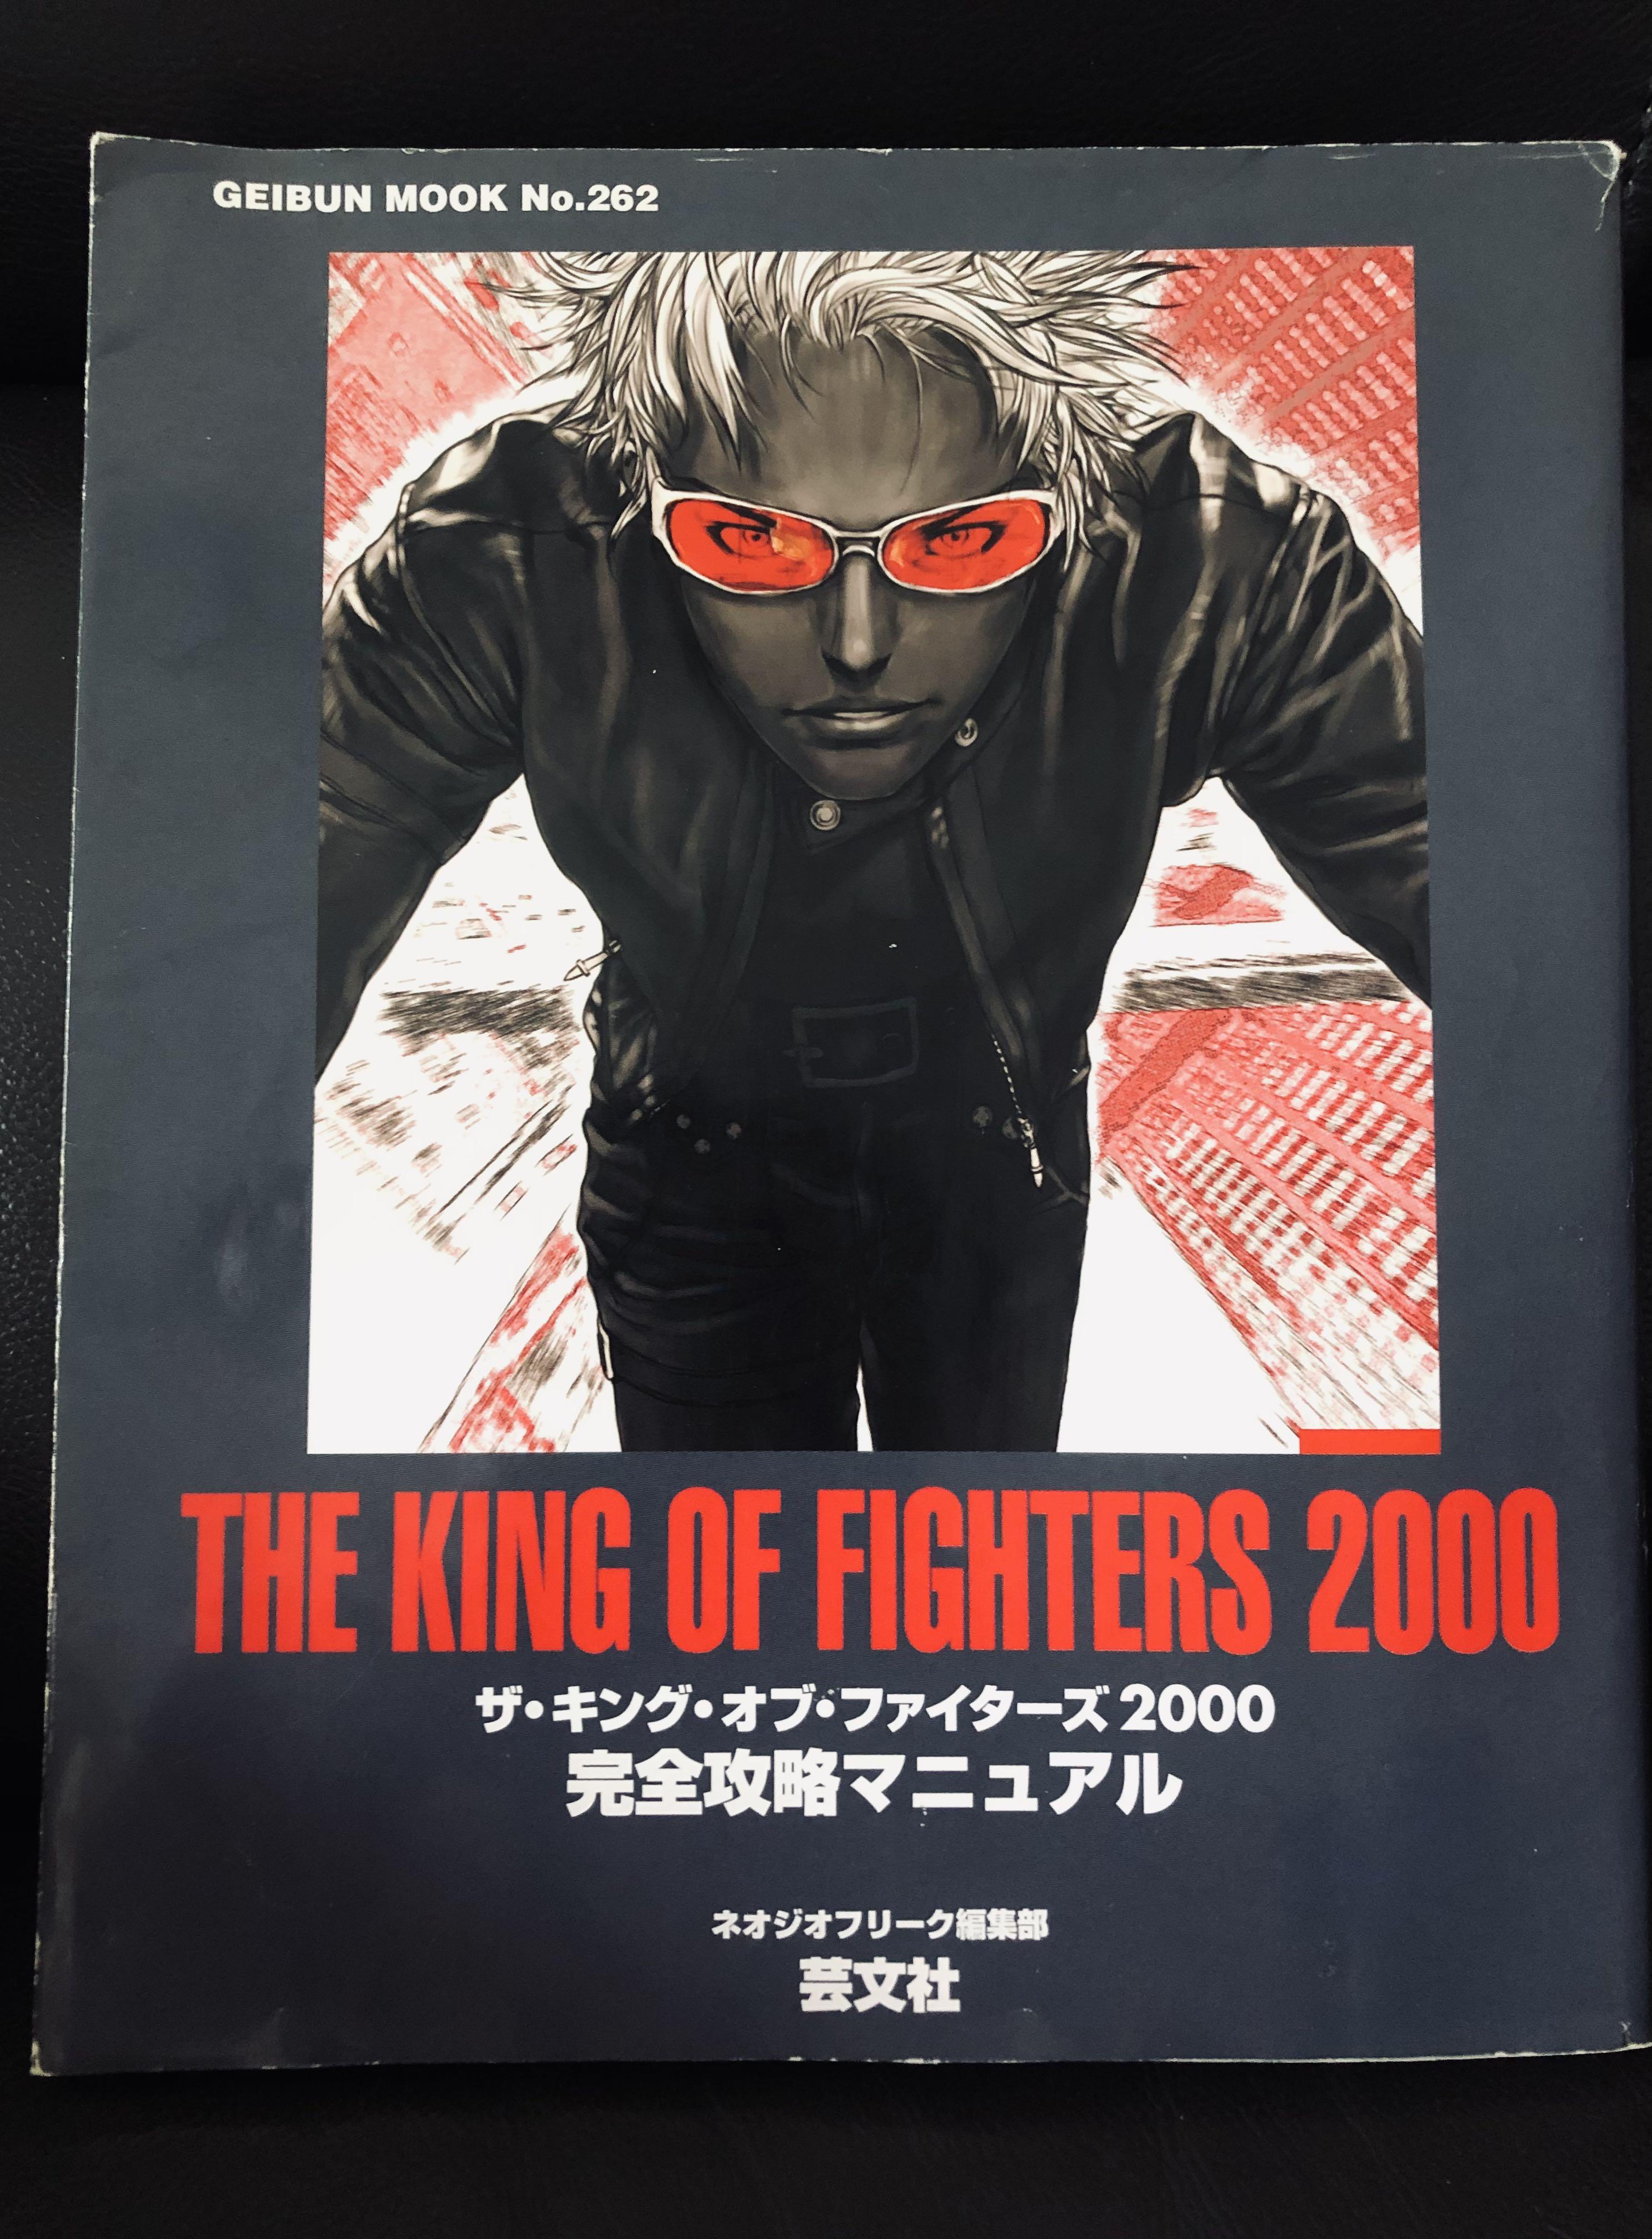 PS4 KOF 拳皇2000《The King of Fighters 2000》PlayStation 4 限量